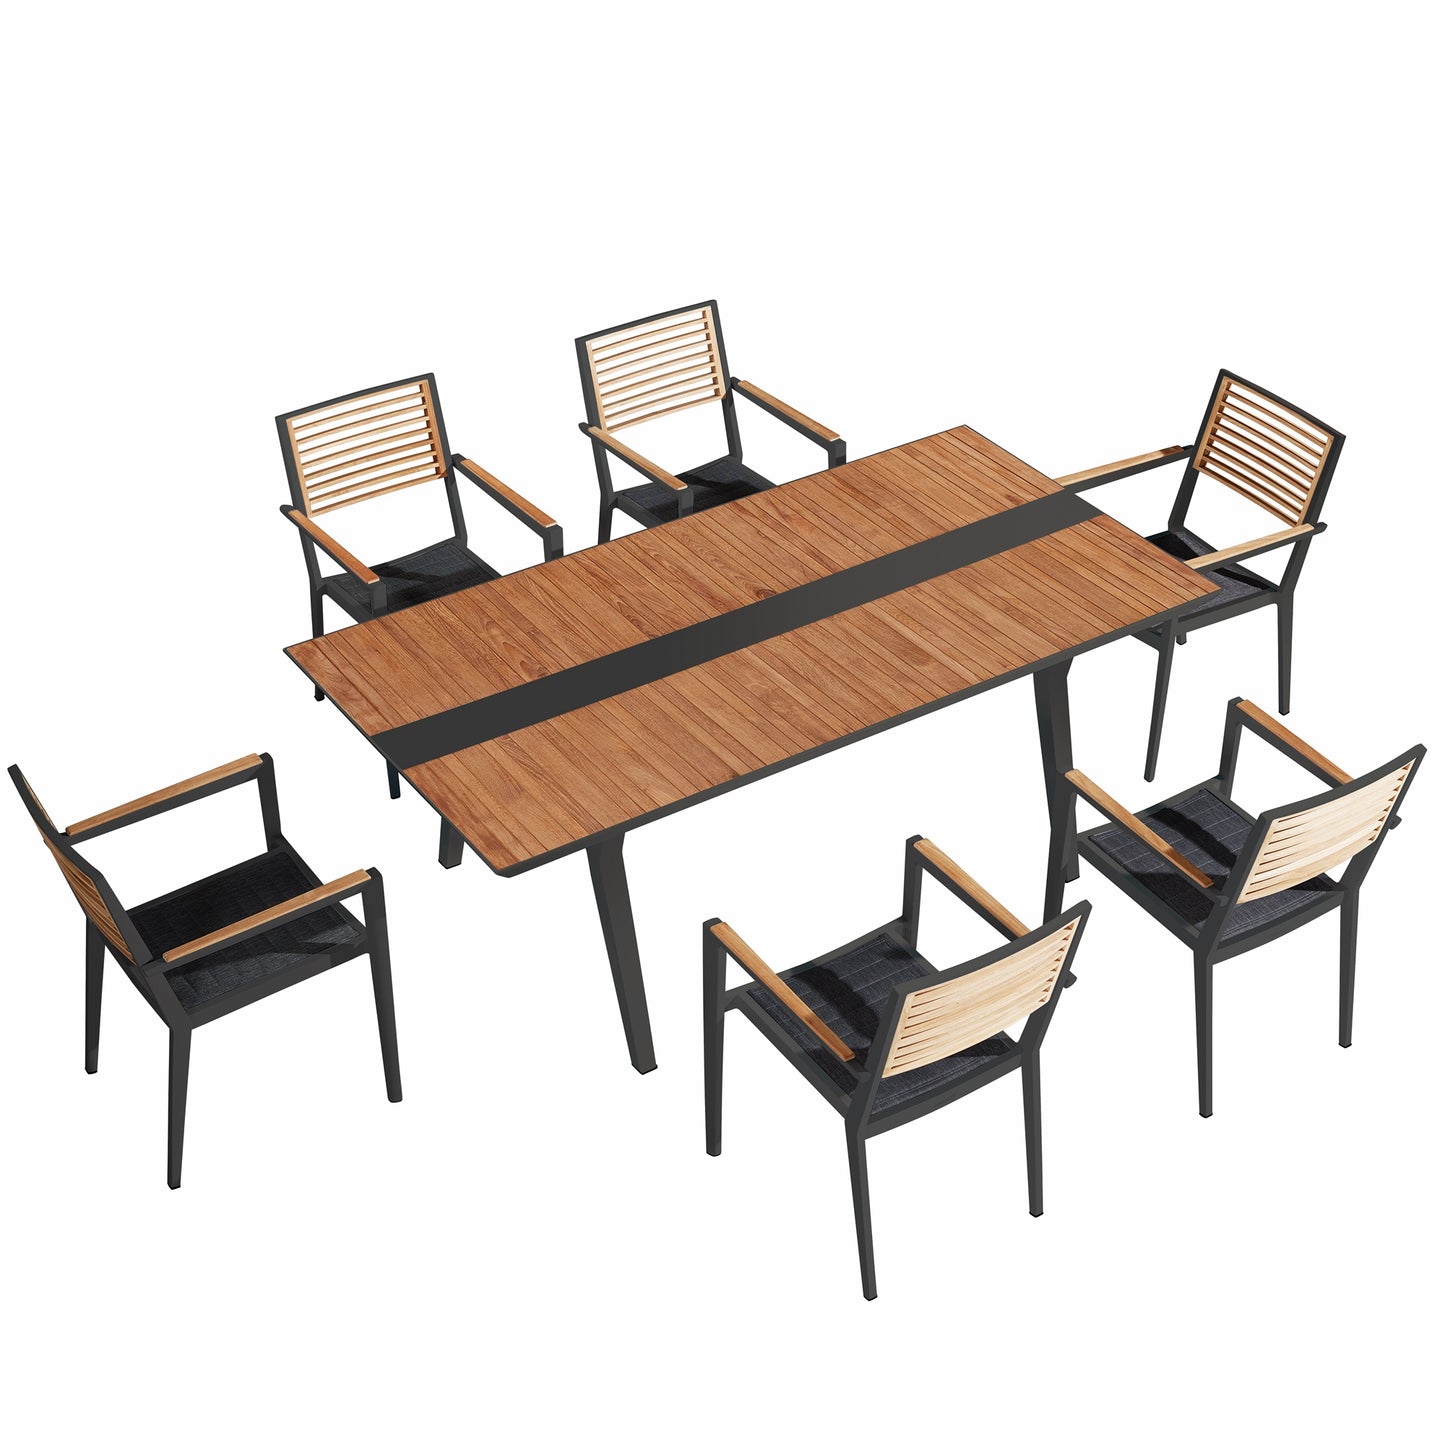 Champion Patio Dining Set, 7 Pieces Outdoor Dining Chairs with Teak Solid Wood Tabletop, Matte Charcoal Aluminum Frame